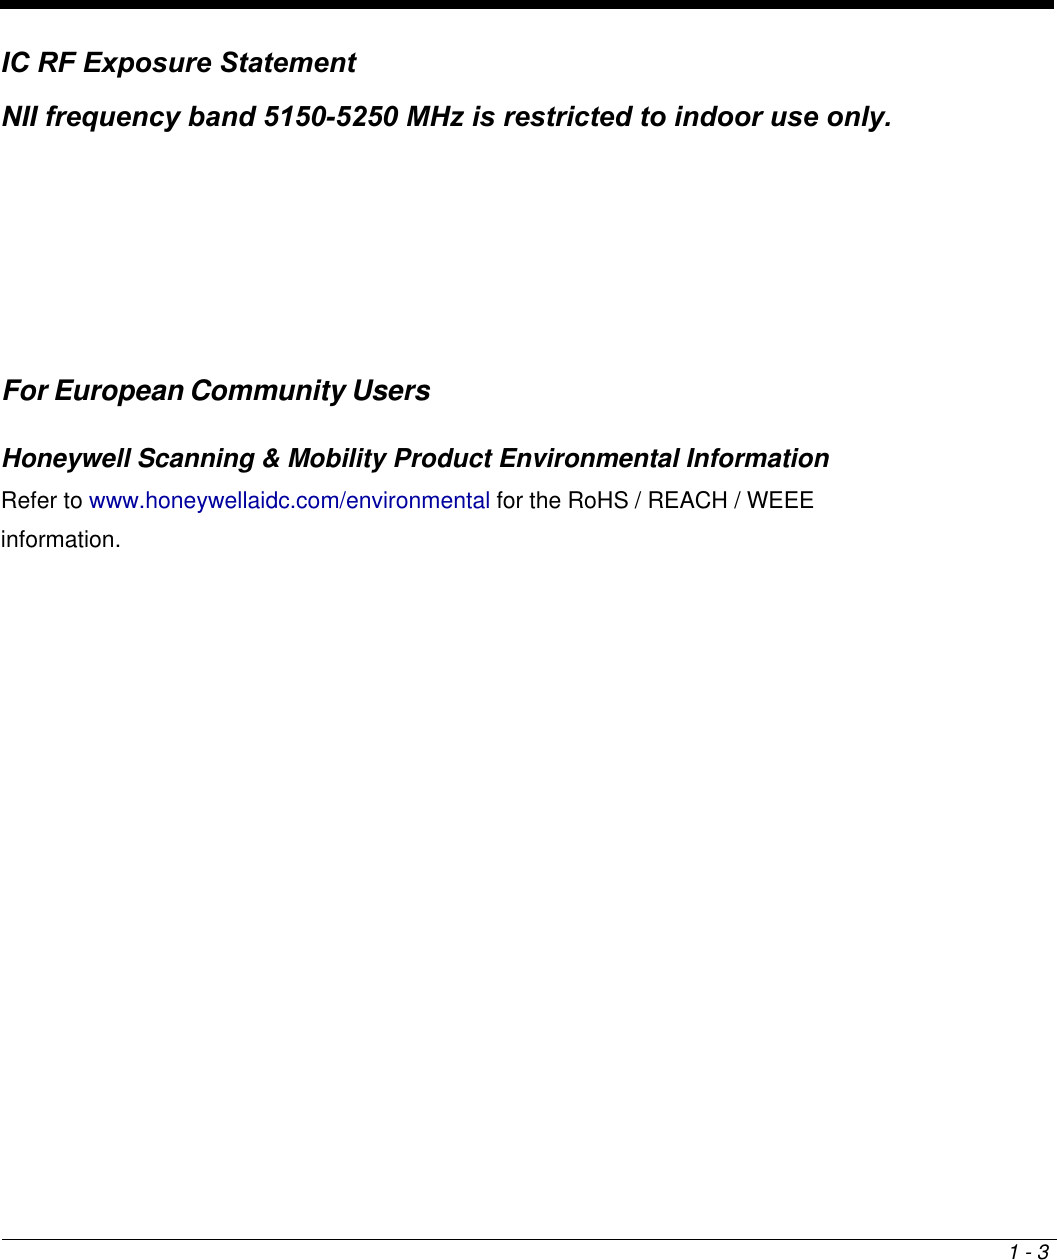 IC RF Exposure Statement NII frequency band 5150-5250 MHz is restricted to indoor use only. For European Community Users Honeywell Scanning &amp; Mobility Product Environmental Information Refer to www.honeywellaidc.com/environmental for the RoHS / REACH / WEEE information. 1 - 3